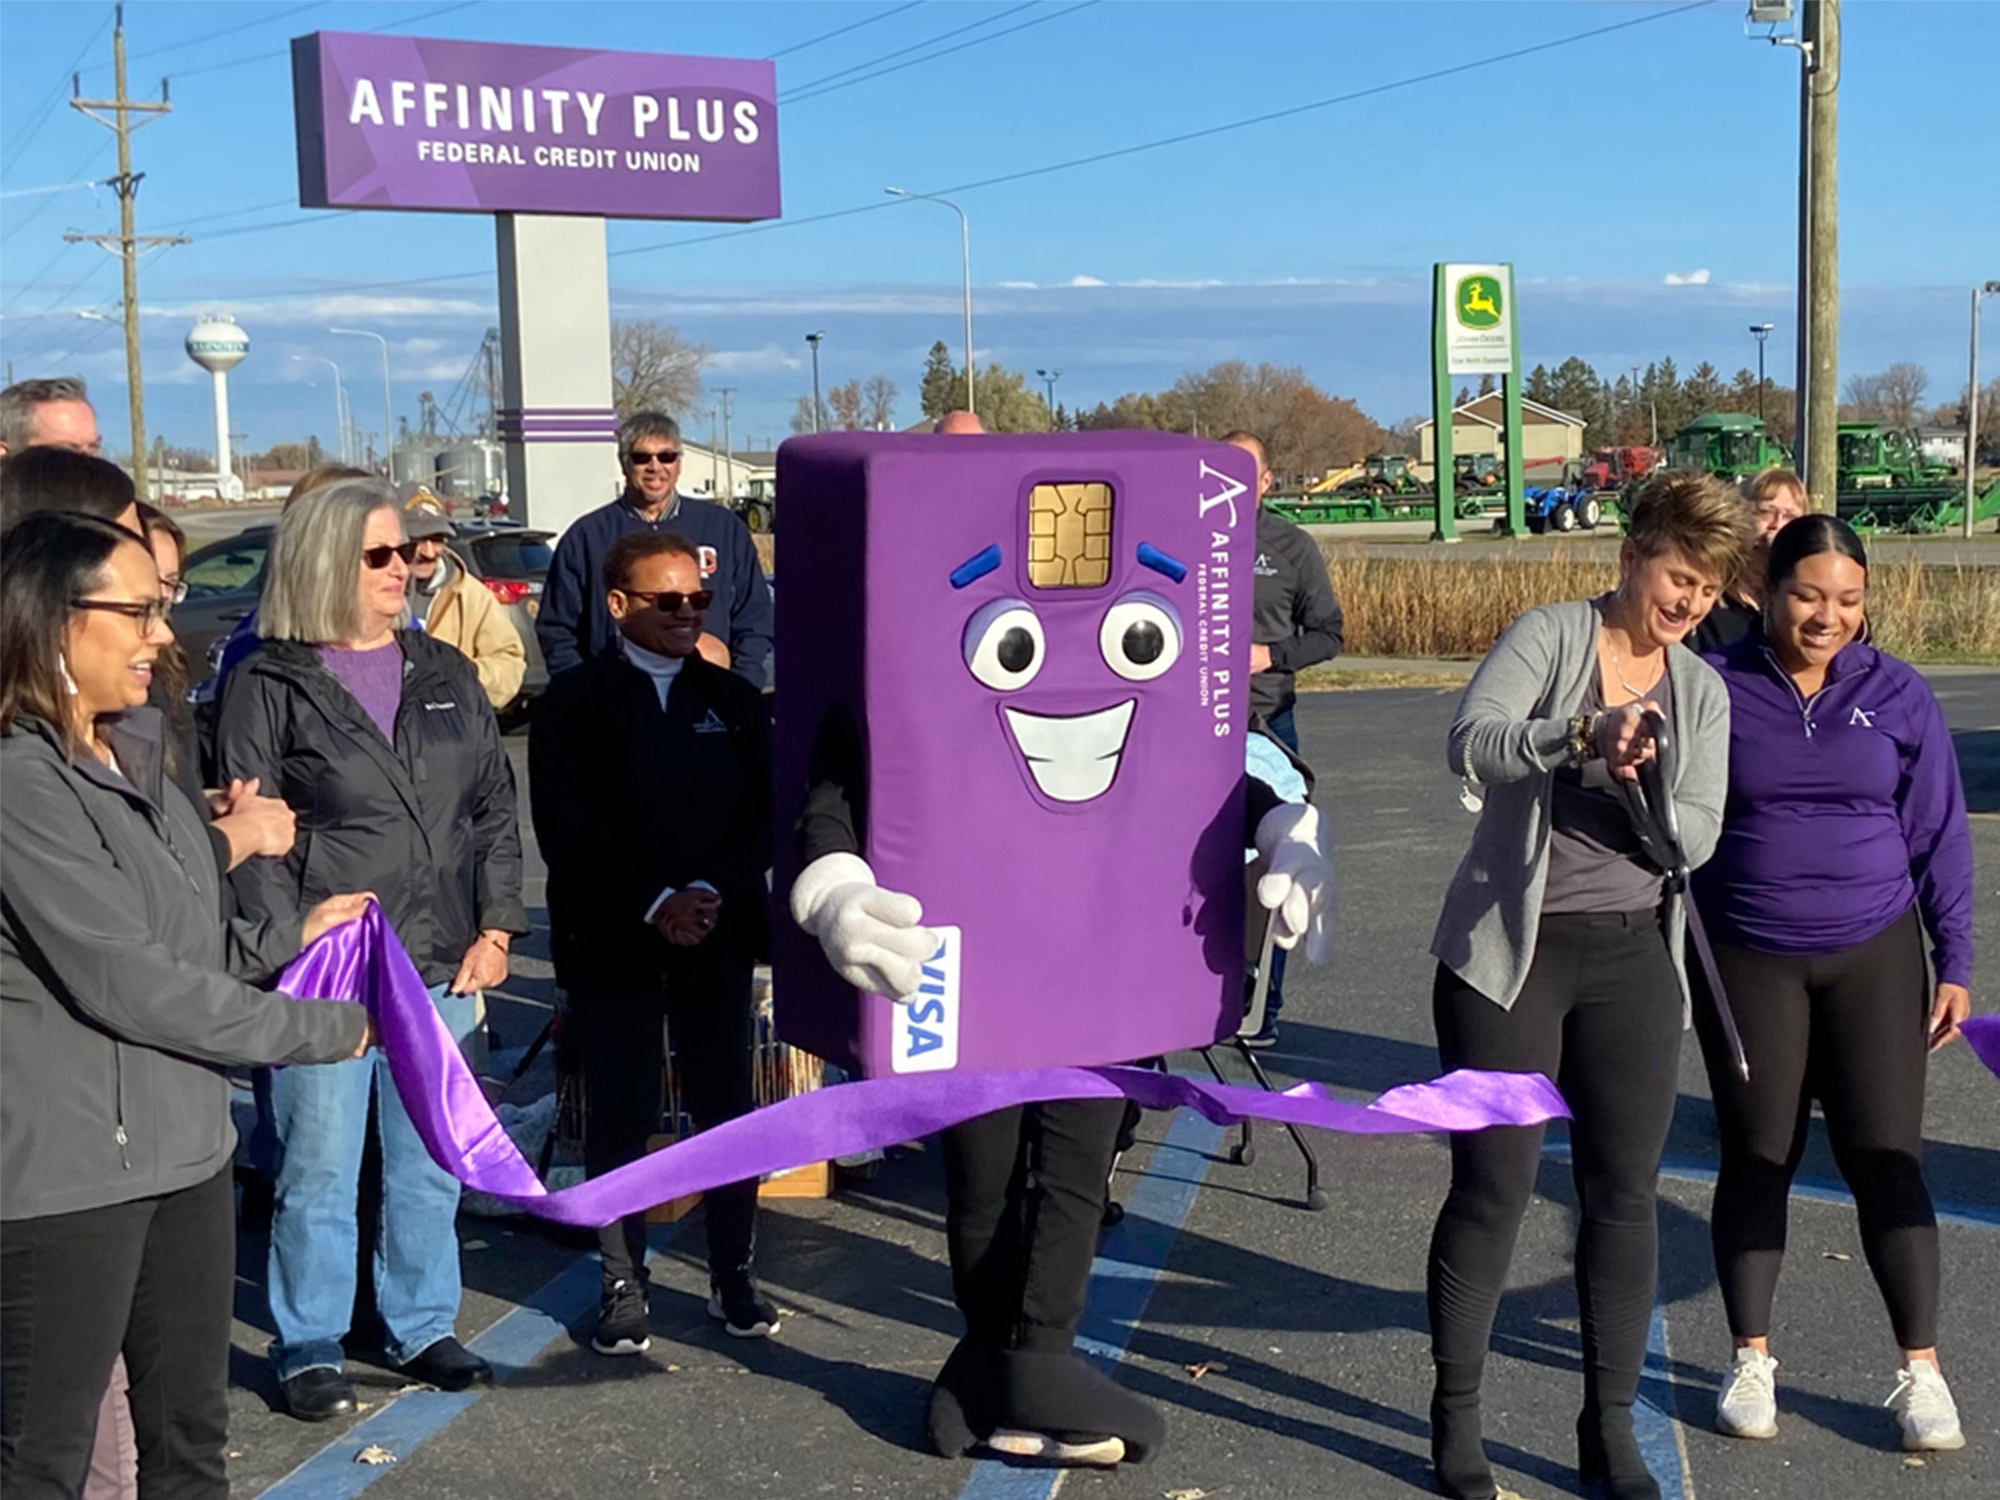 Affinity Plus mascot, Chip, and others cut a purple ribbon